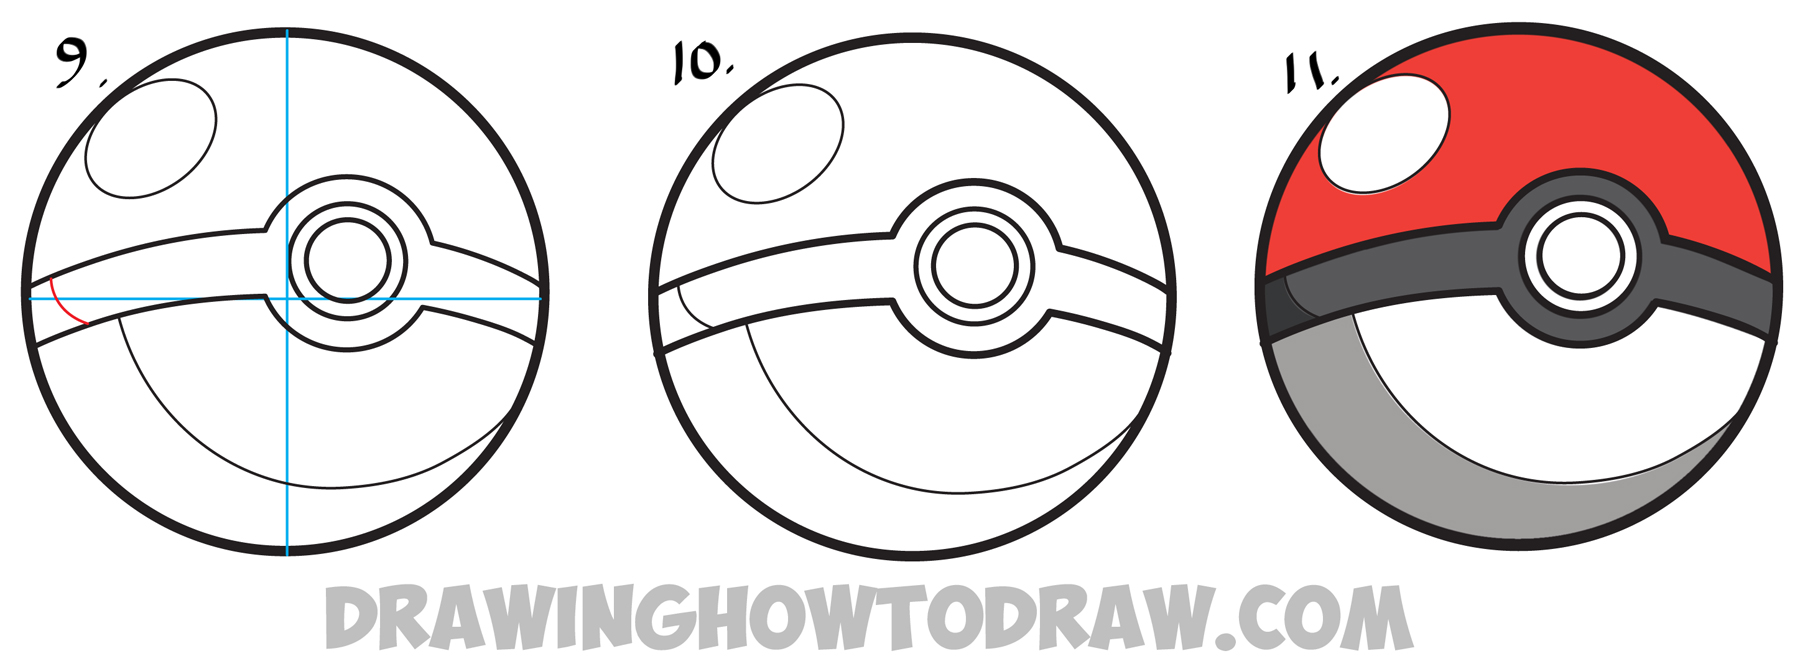 Pokemon Pokeball Coloring Pages